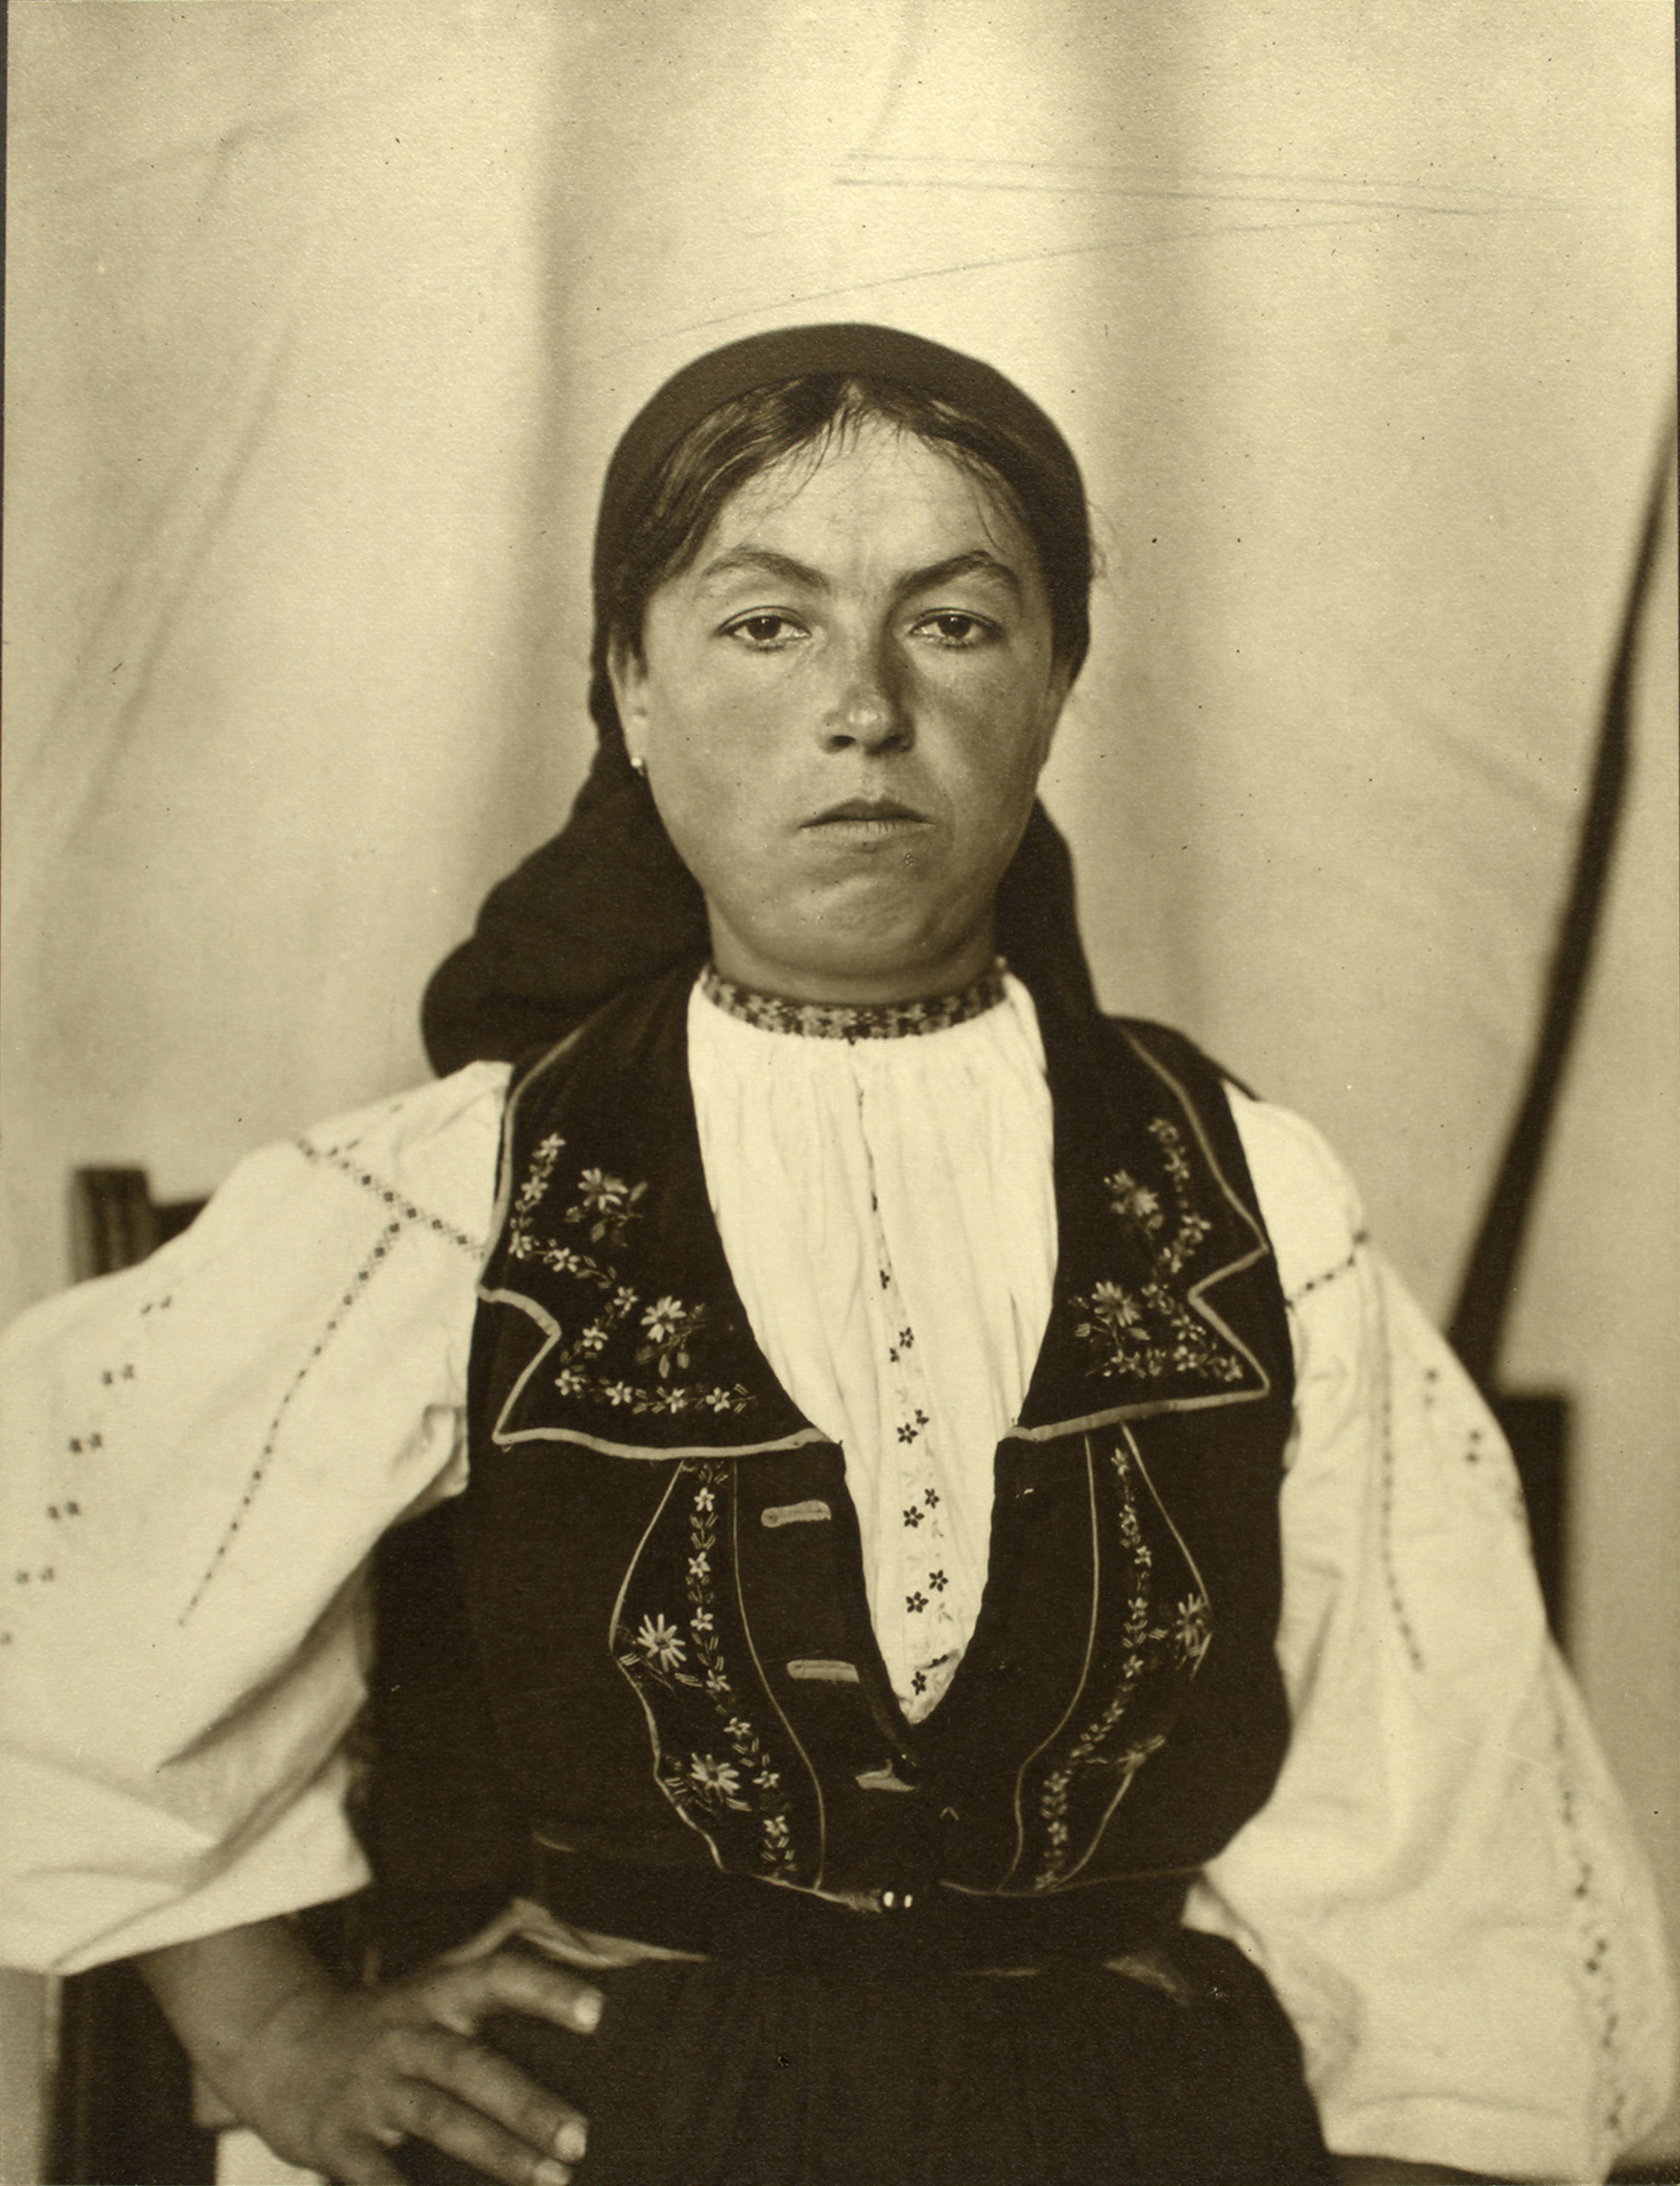 Portrait of a Romanian woman at the Ellis Island Immigration Station, circa 1905-1914.